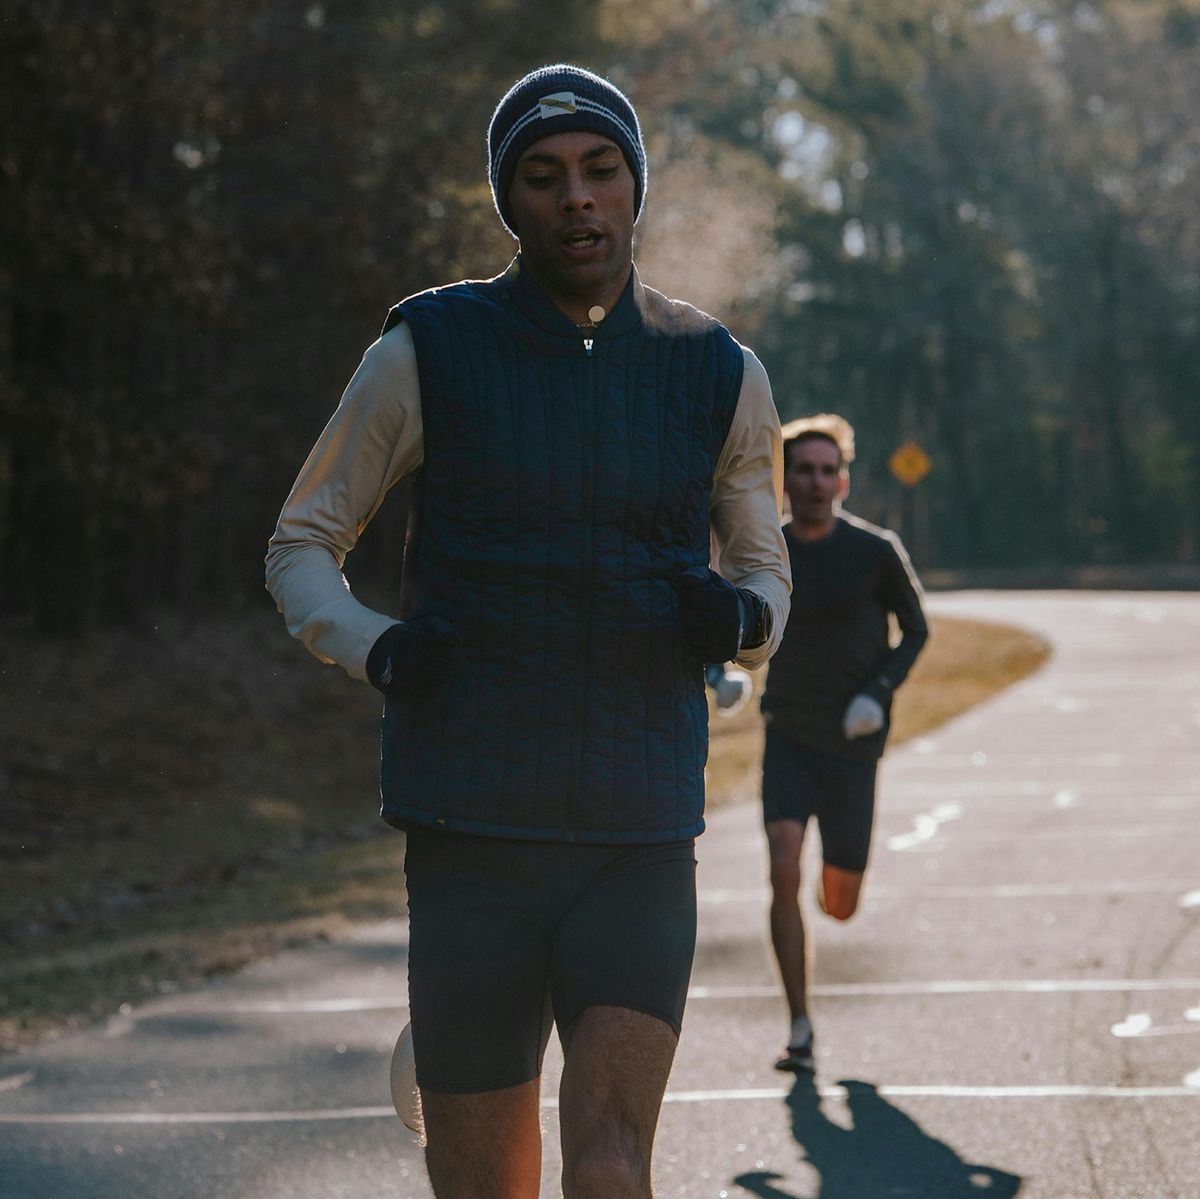 Tracksmith's New Spring Collection Includes Base Layers, Tights